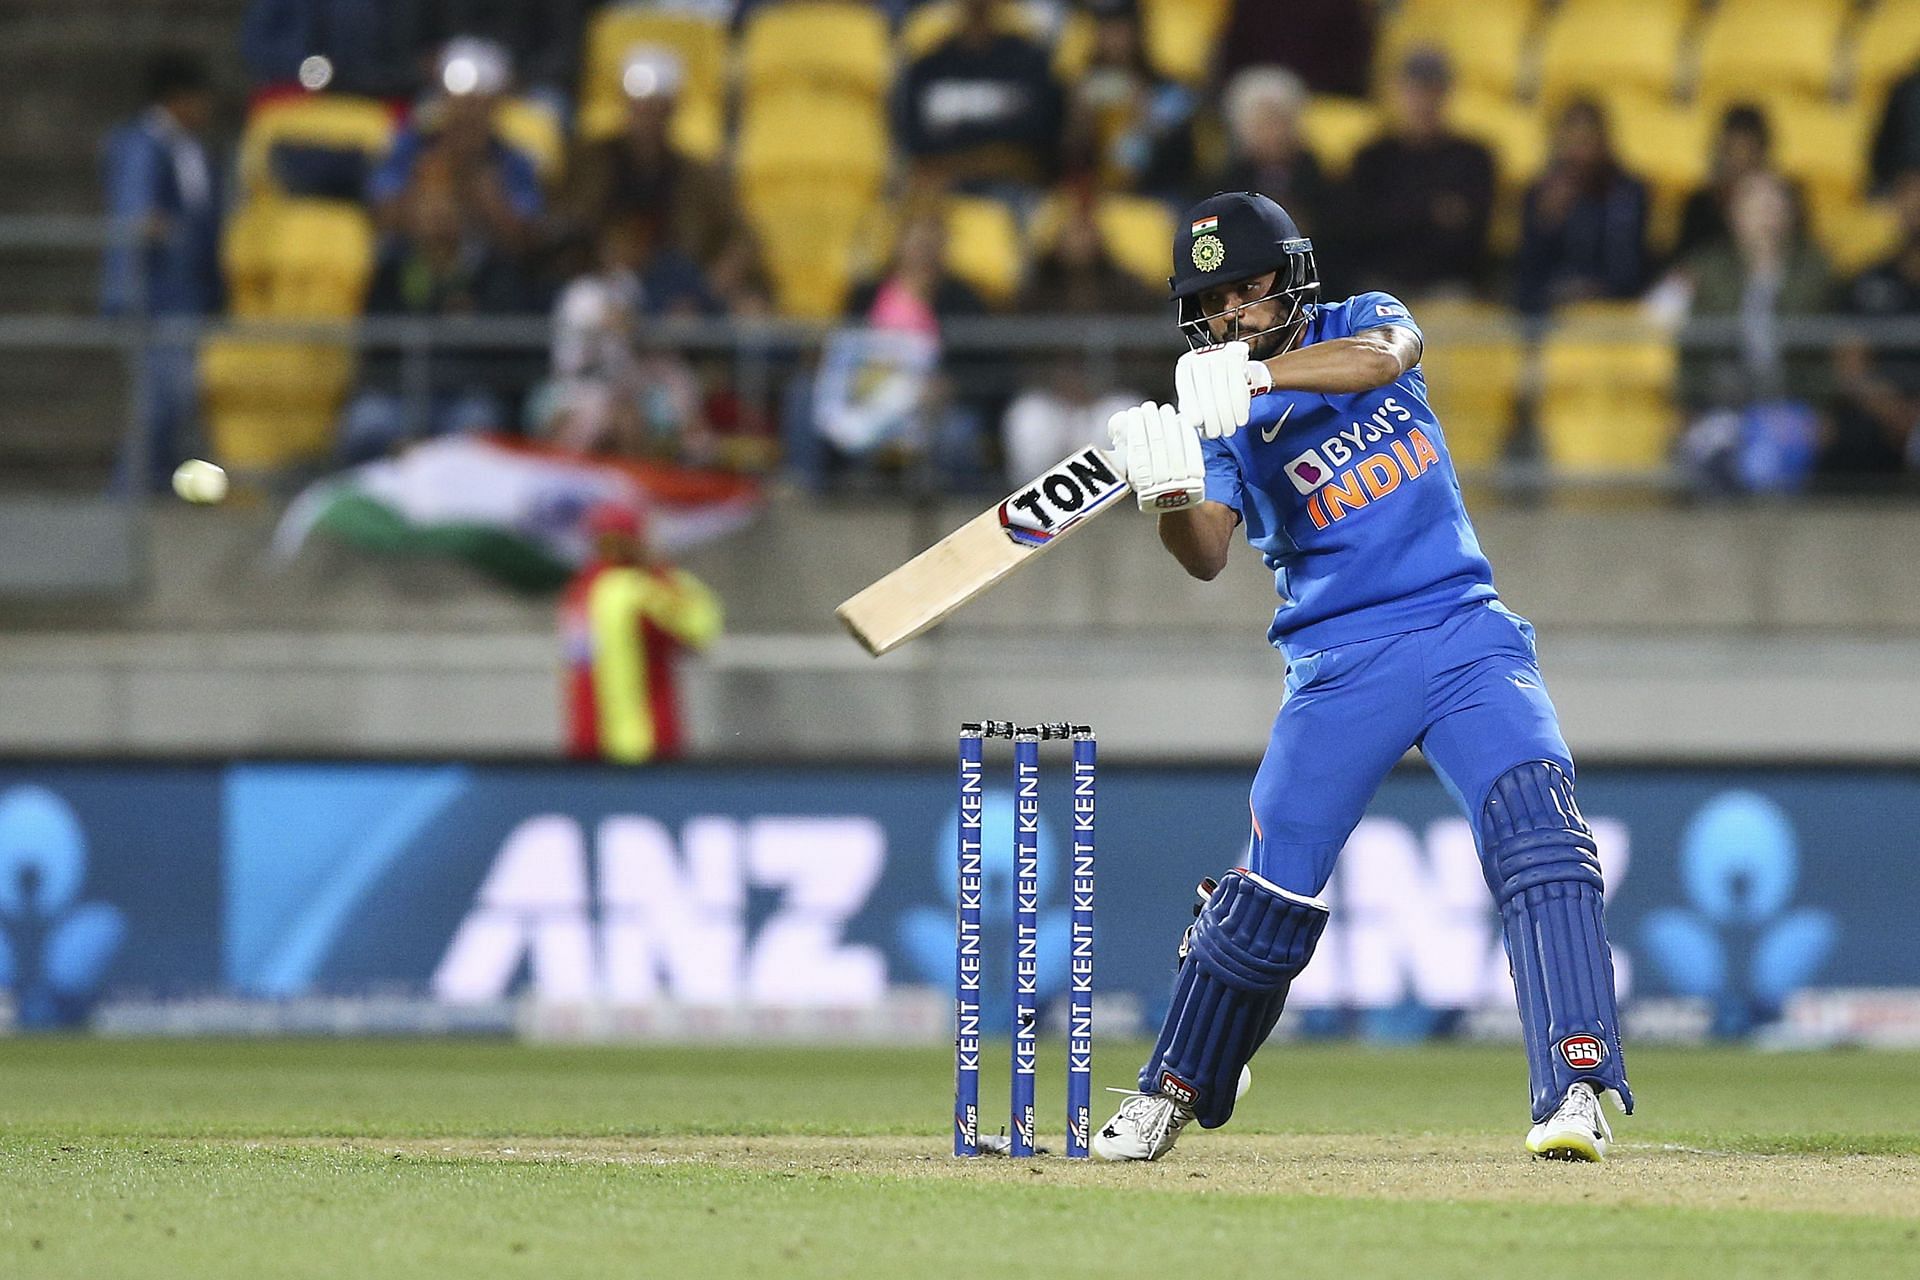 New Zealand v India - T20: Game 4 (Image: Getty)